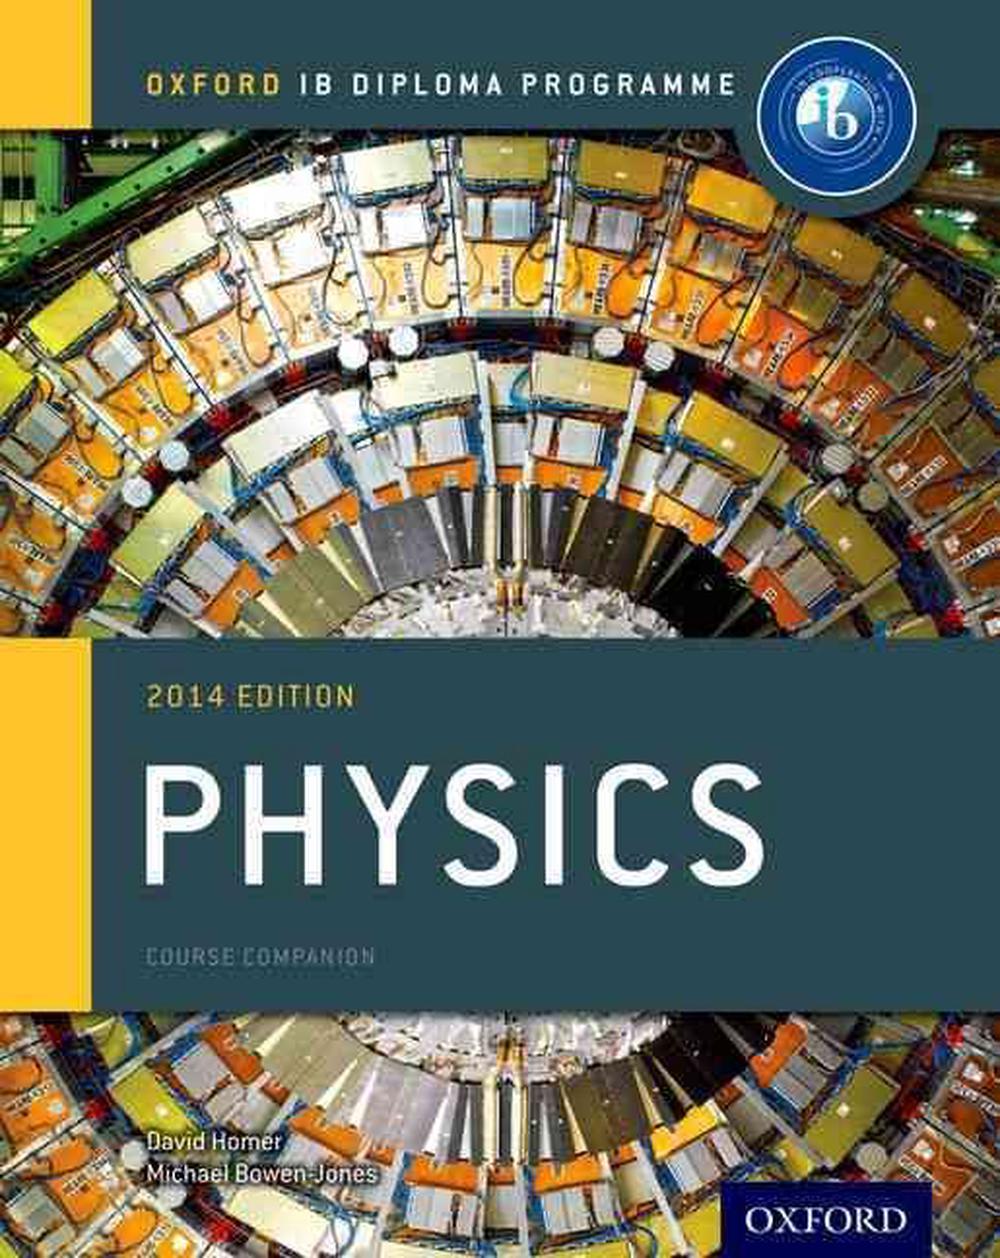 A2 Physics By Mike Bowen-Jones Do Brilliantly At 